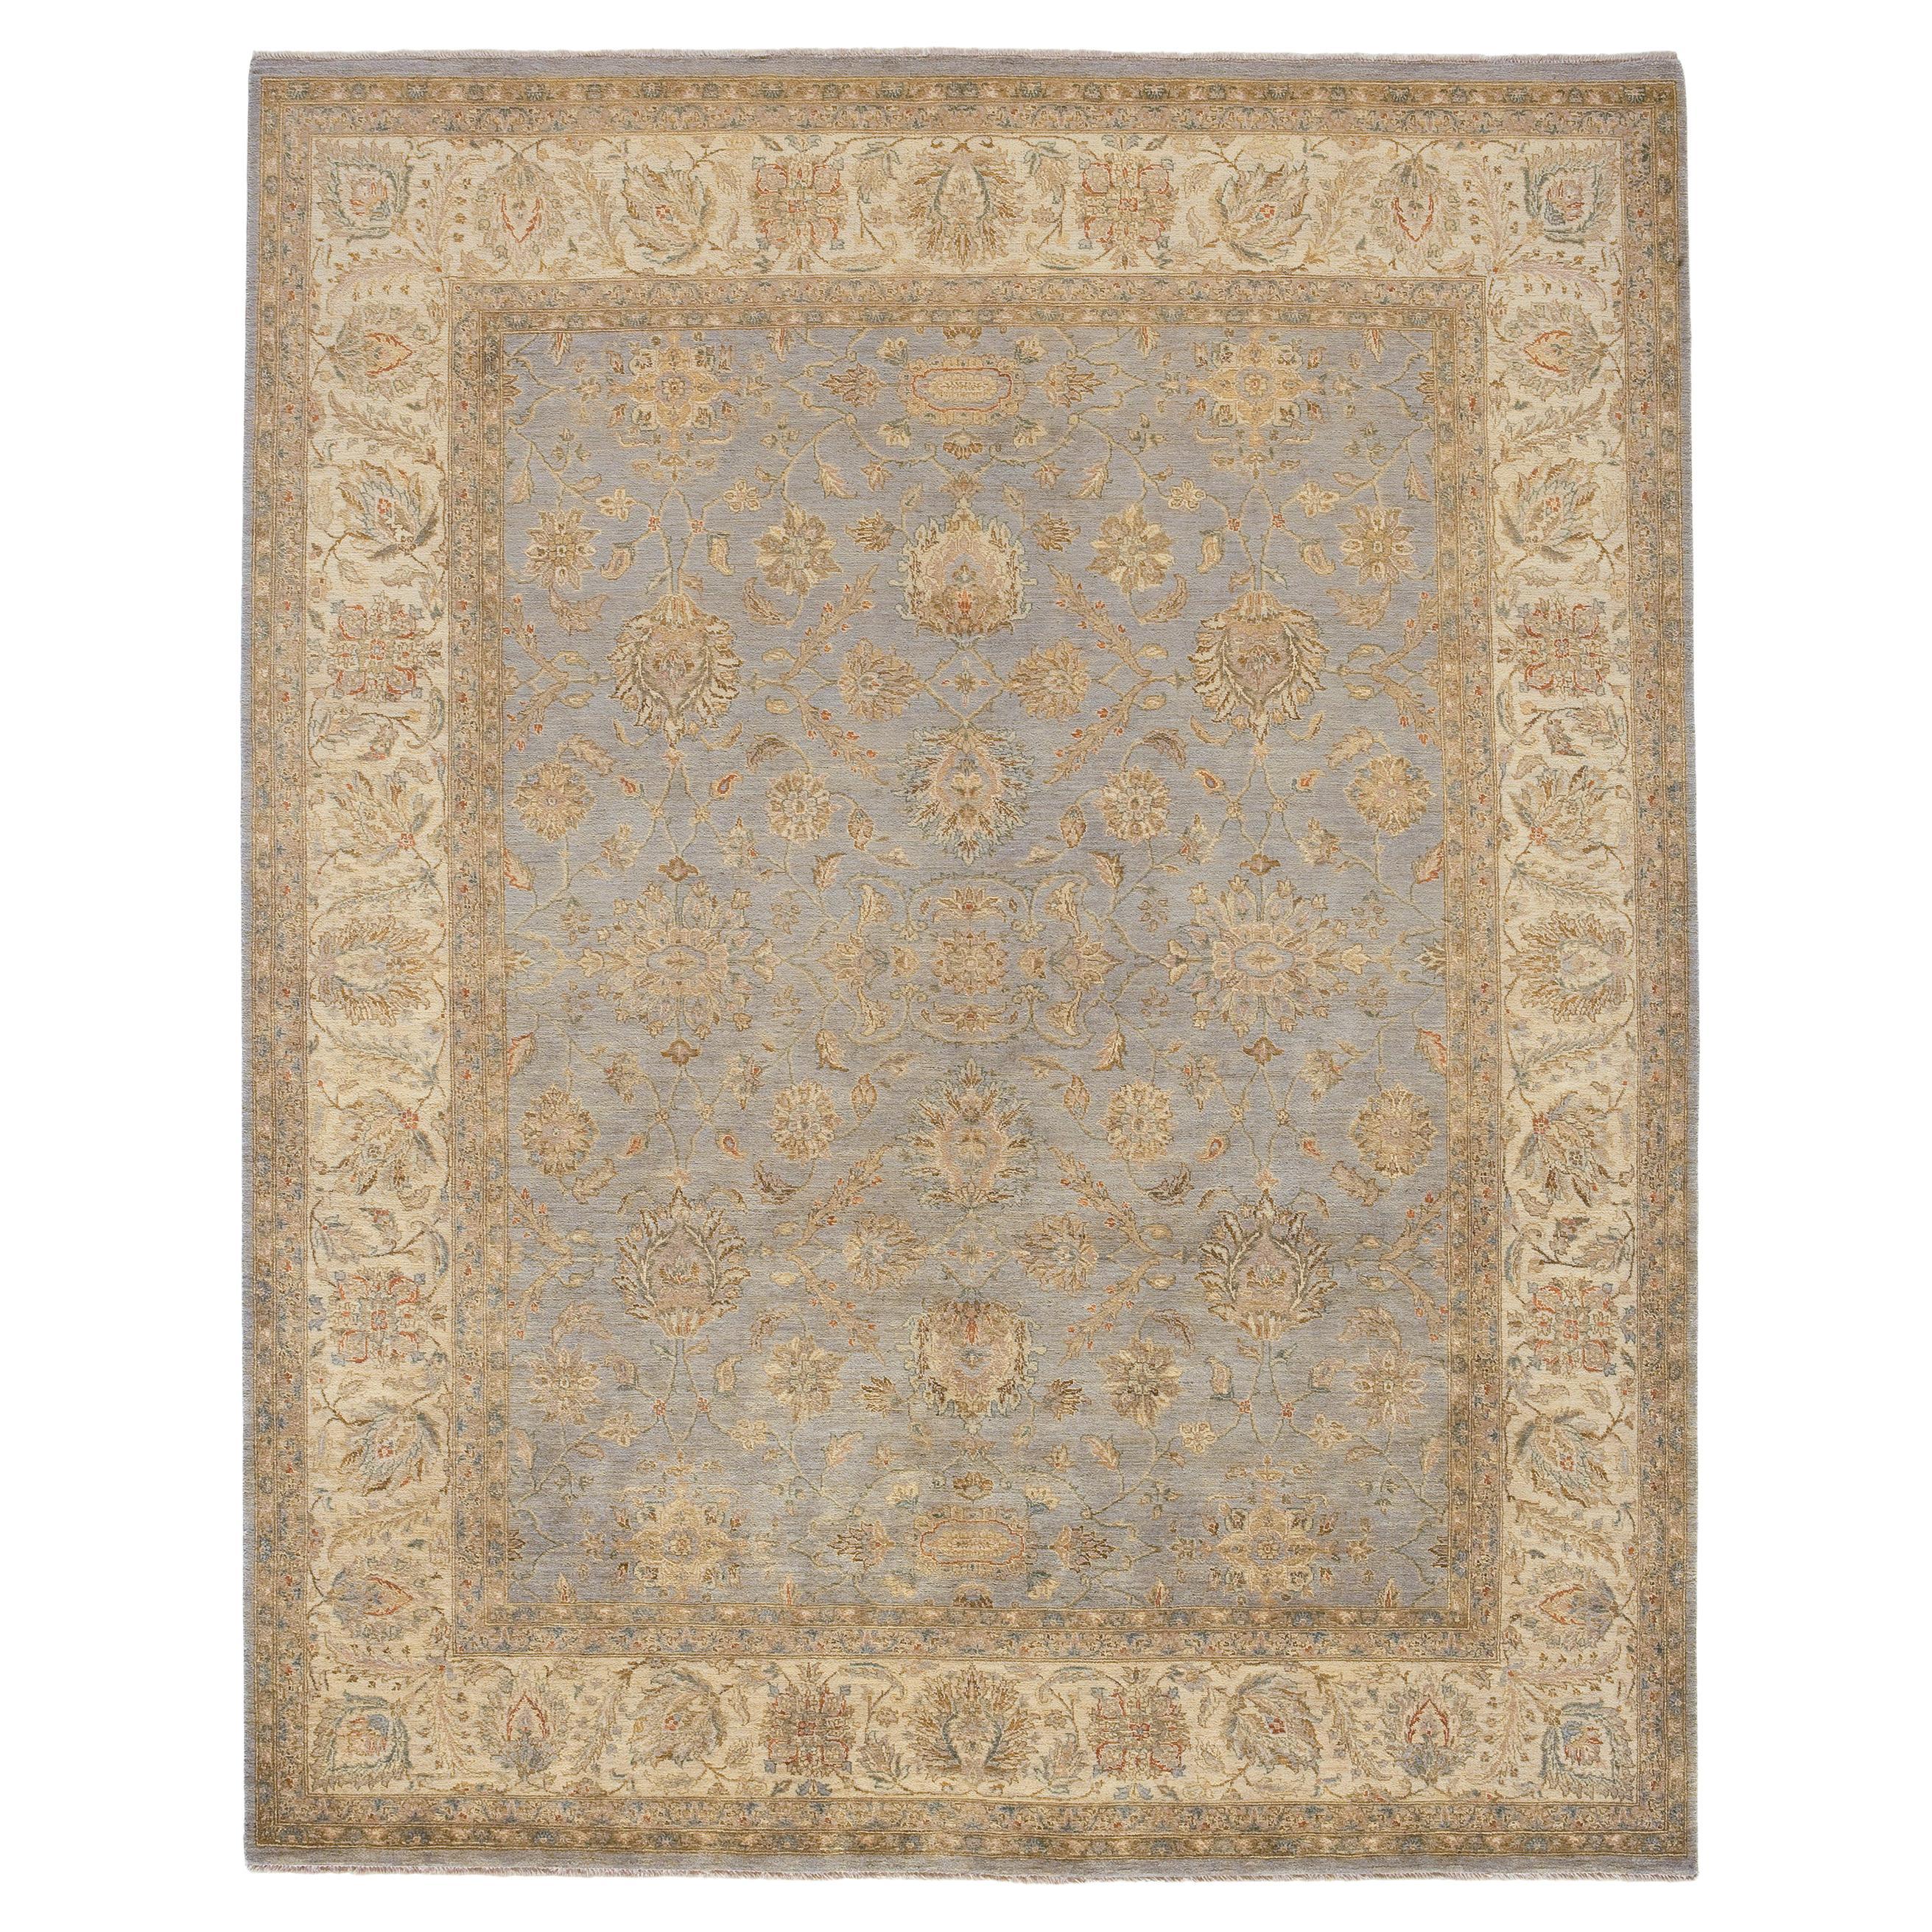 Luxury Traditional Hand-Knotted Ziegler Opal and Cream 12X24 Rug